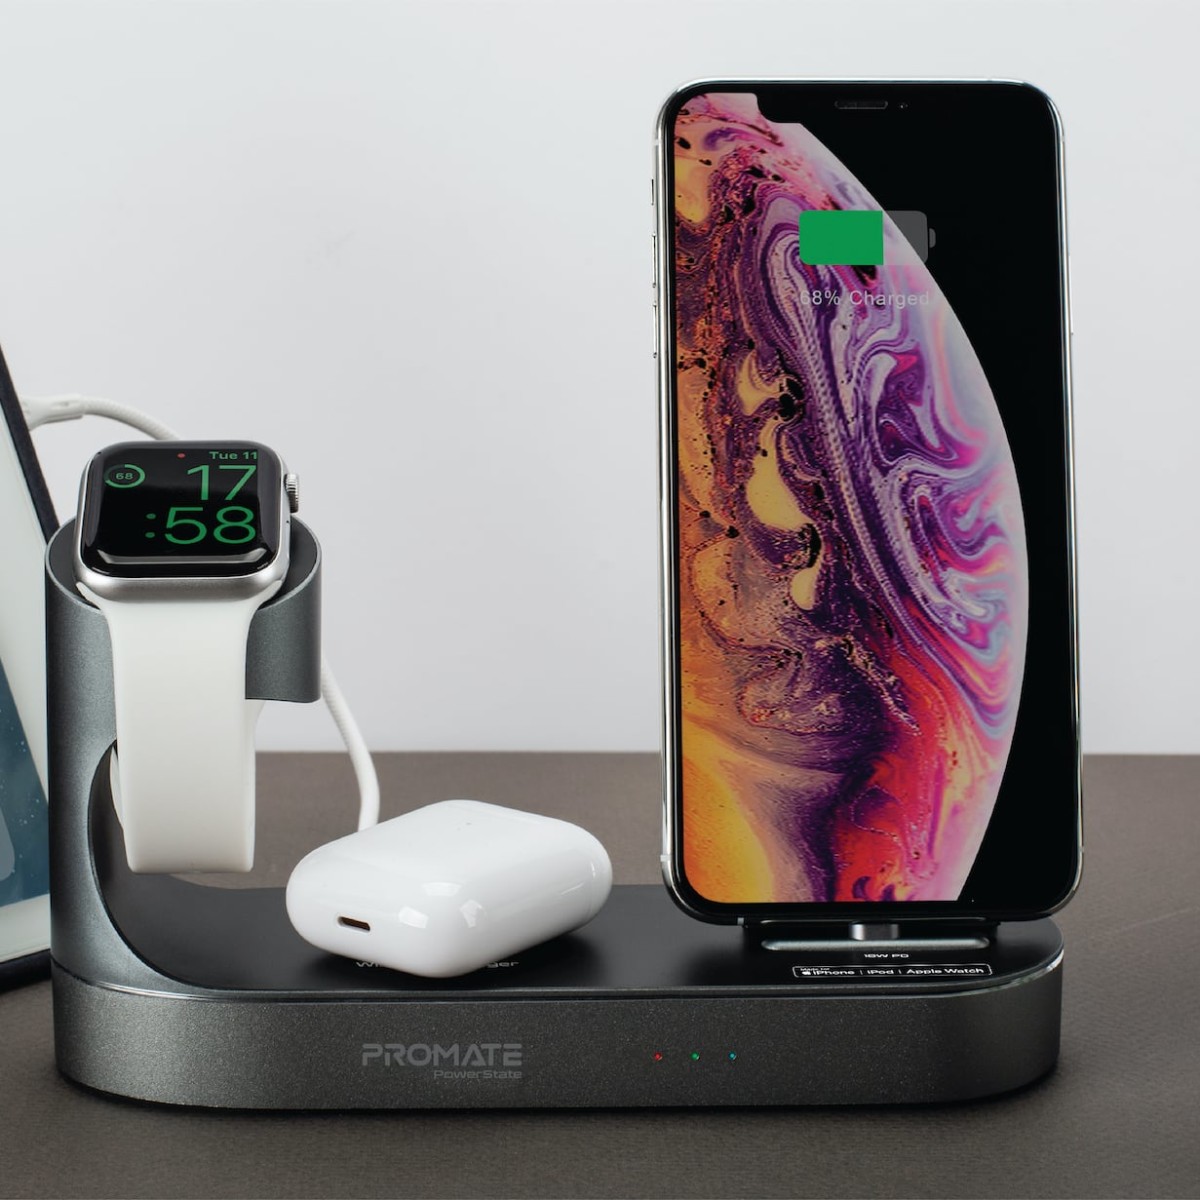 Promate PowerState All-in-One Dock charges and displays all your Apple devices